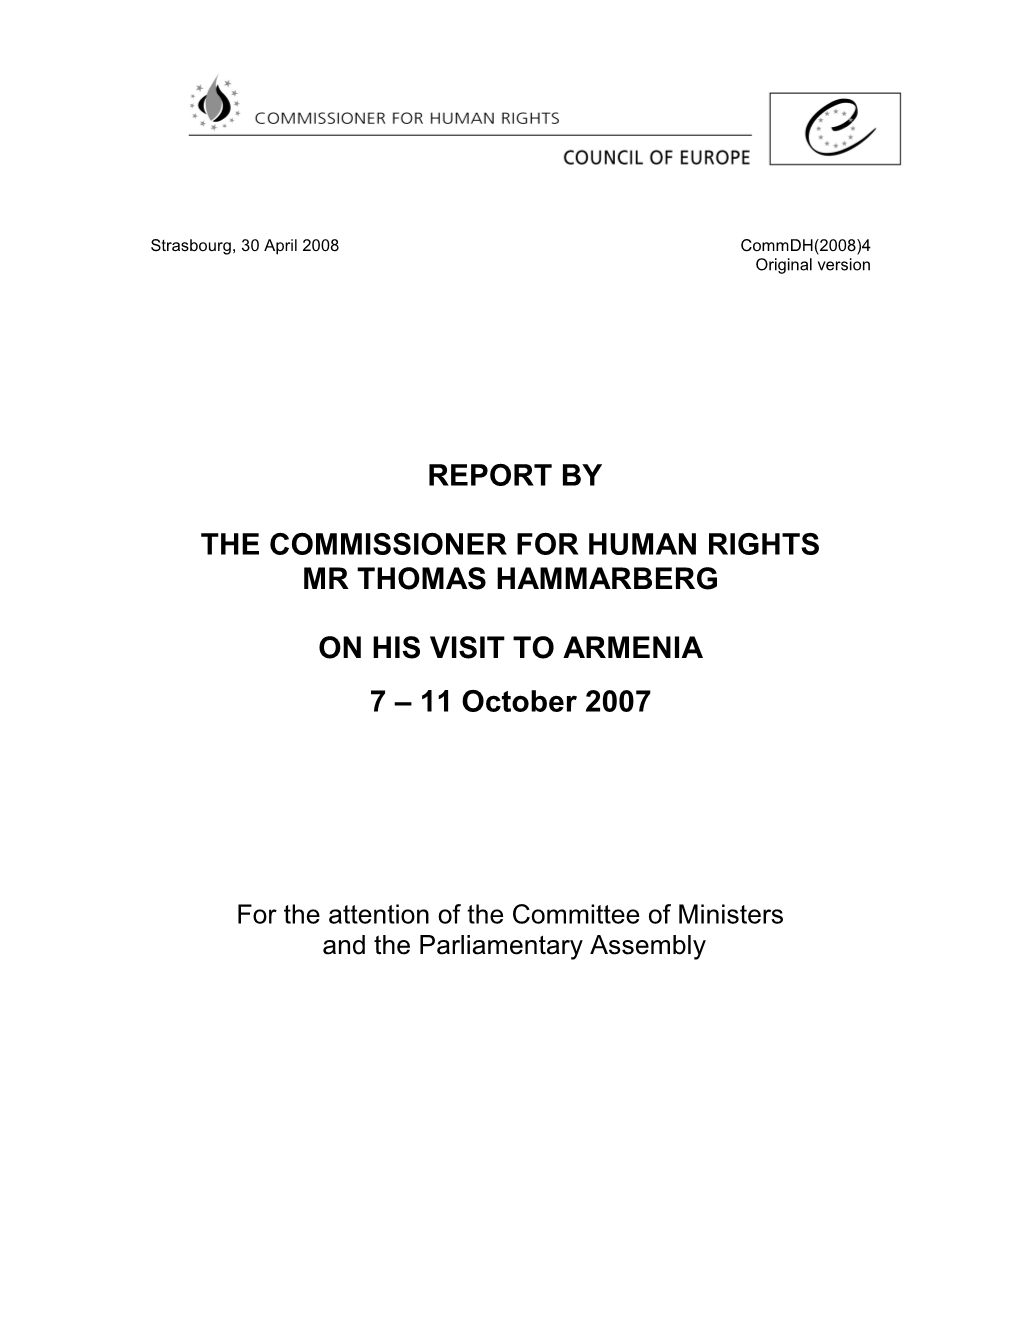 REPORT by the COMMISSIONER for HUMAN RIGHTS MR THOMAS HAMMARBERG on HIS VISIT to ARMENIA 7 – 11 October 2007